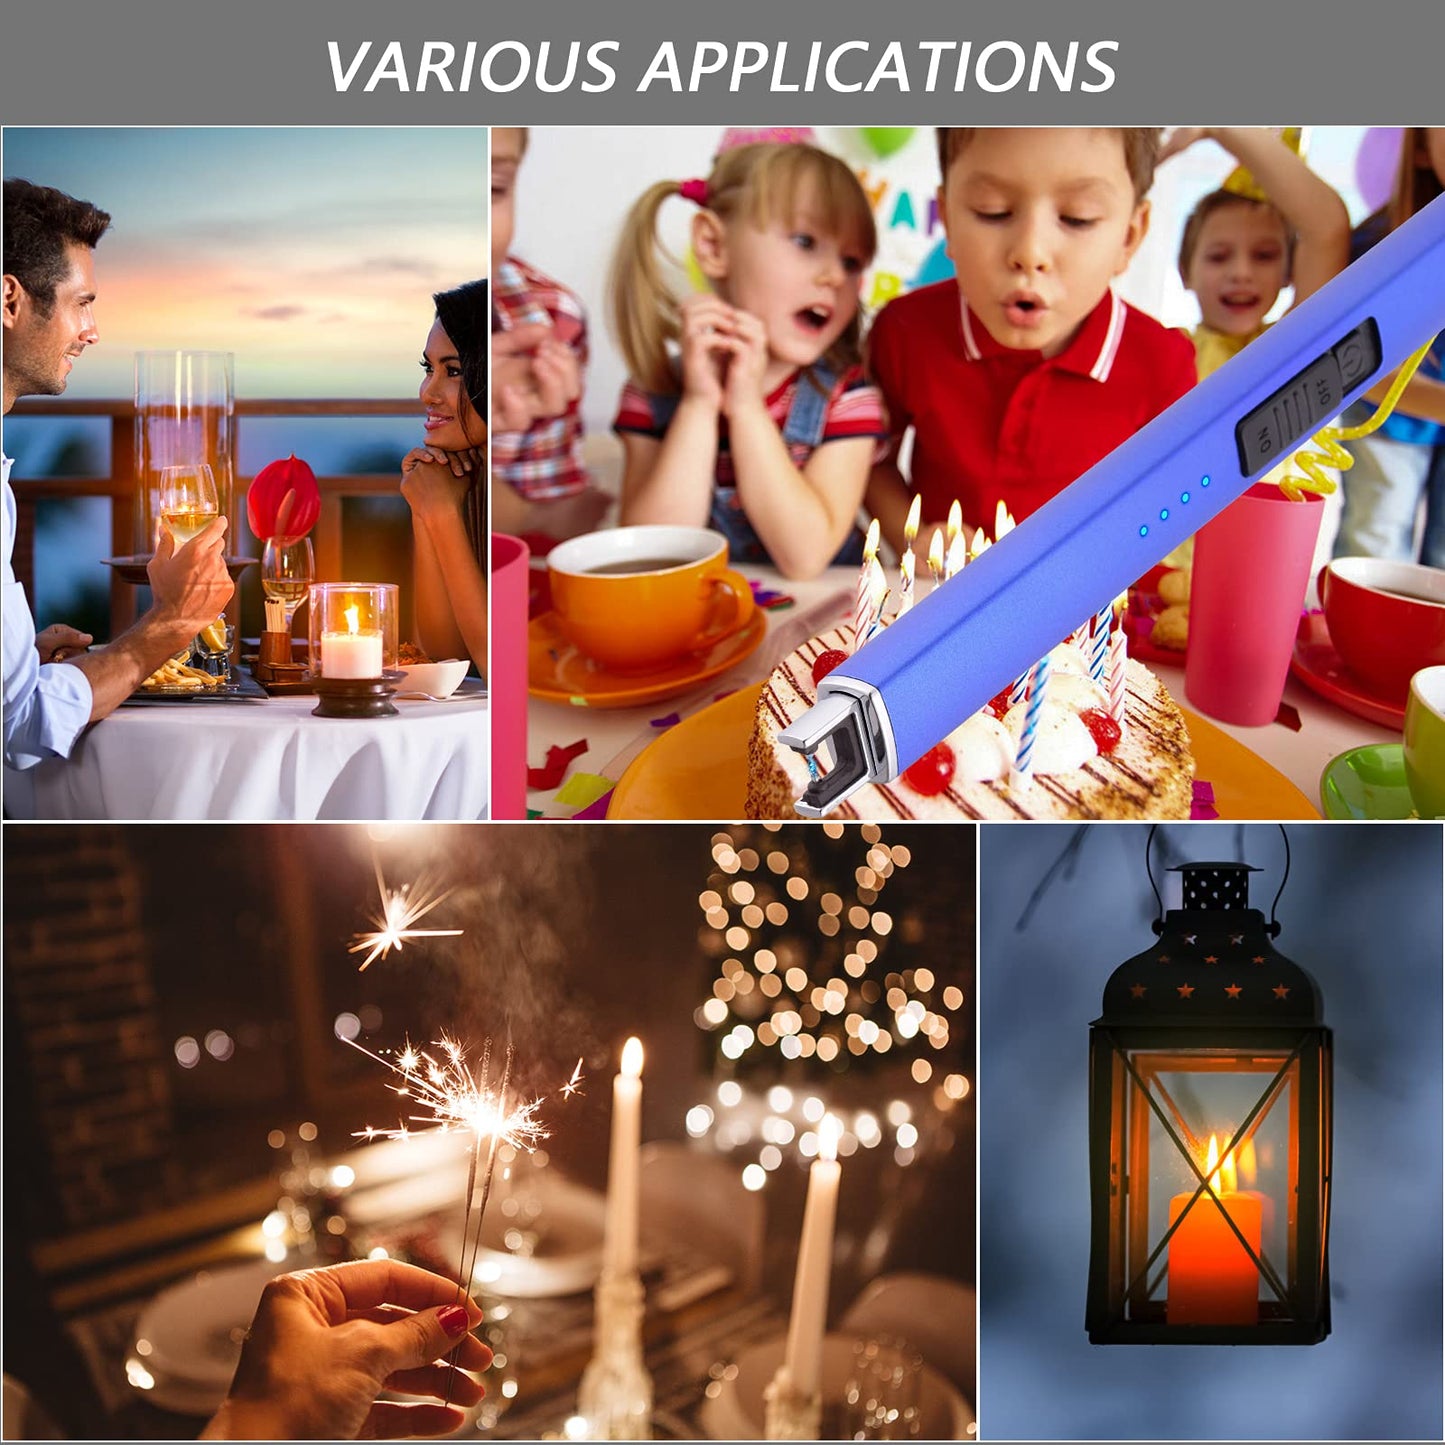 MEIRUBY Lighter Electric Candle Lighter Long Electronic Rechargeable USB Lighter Arc Windproof Flameless Lighters for Candle Camping BBQ Birthday Women's Day Gifts for Women Mom Wife Men, Rose Gold